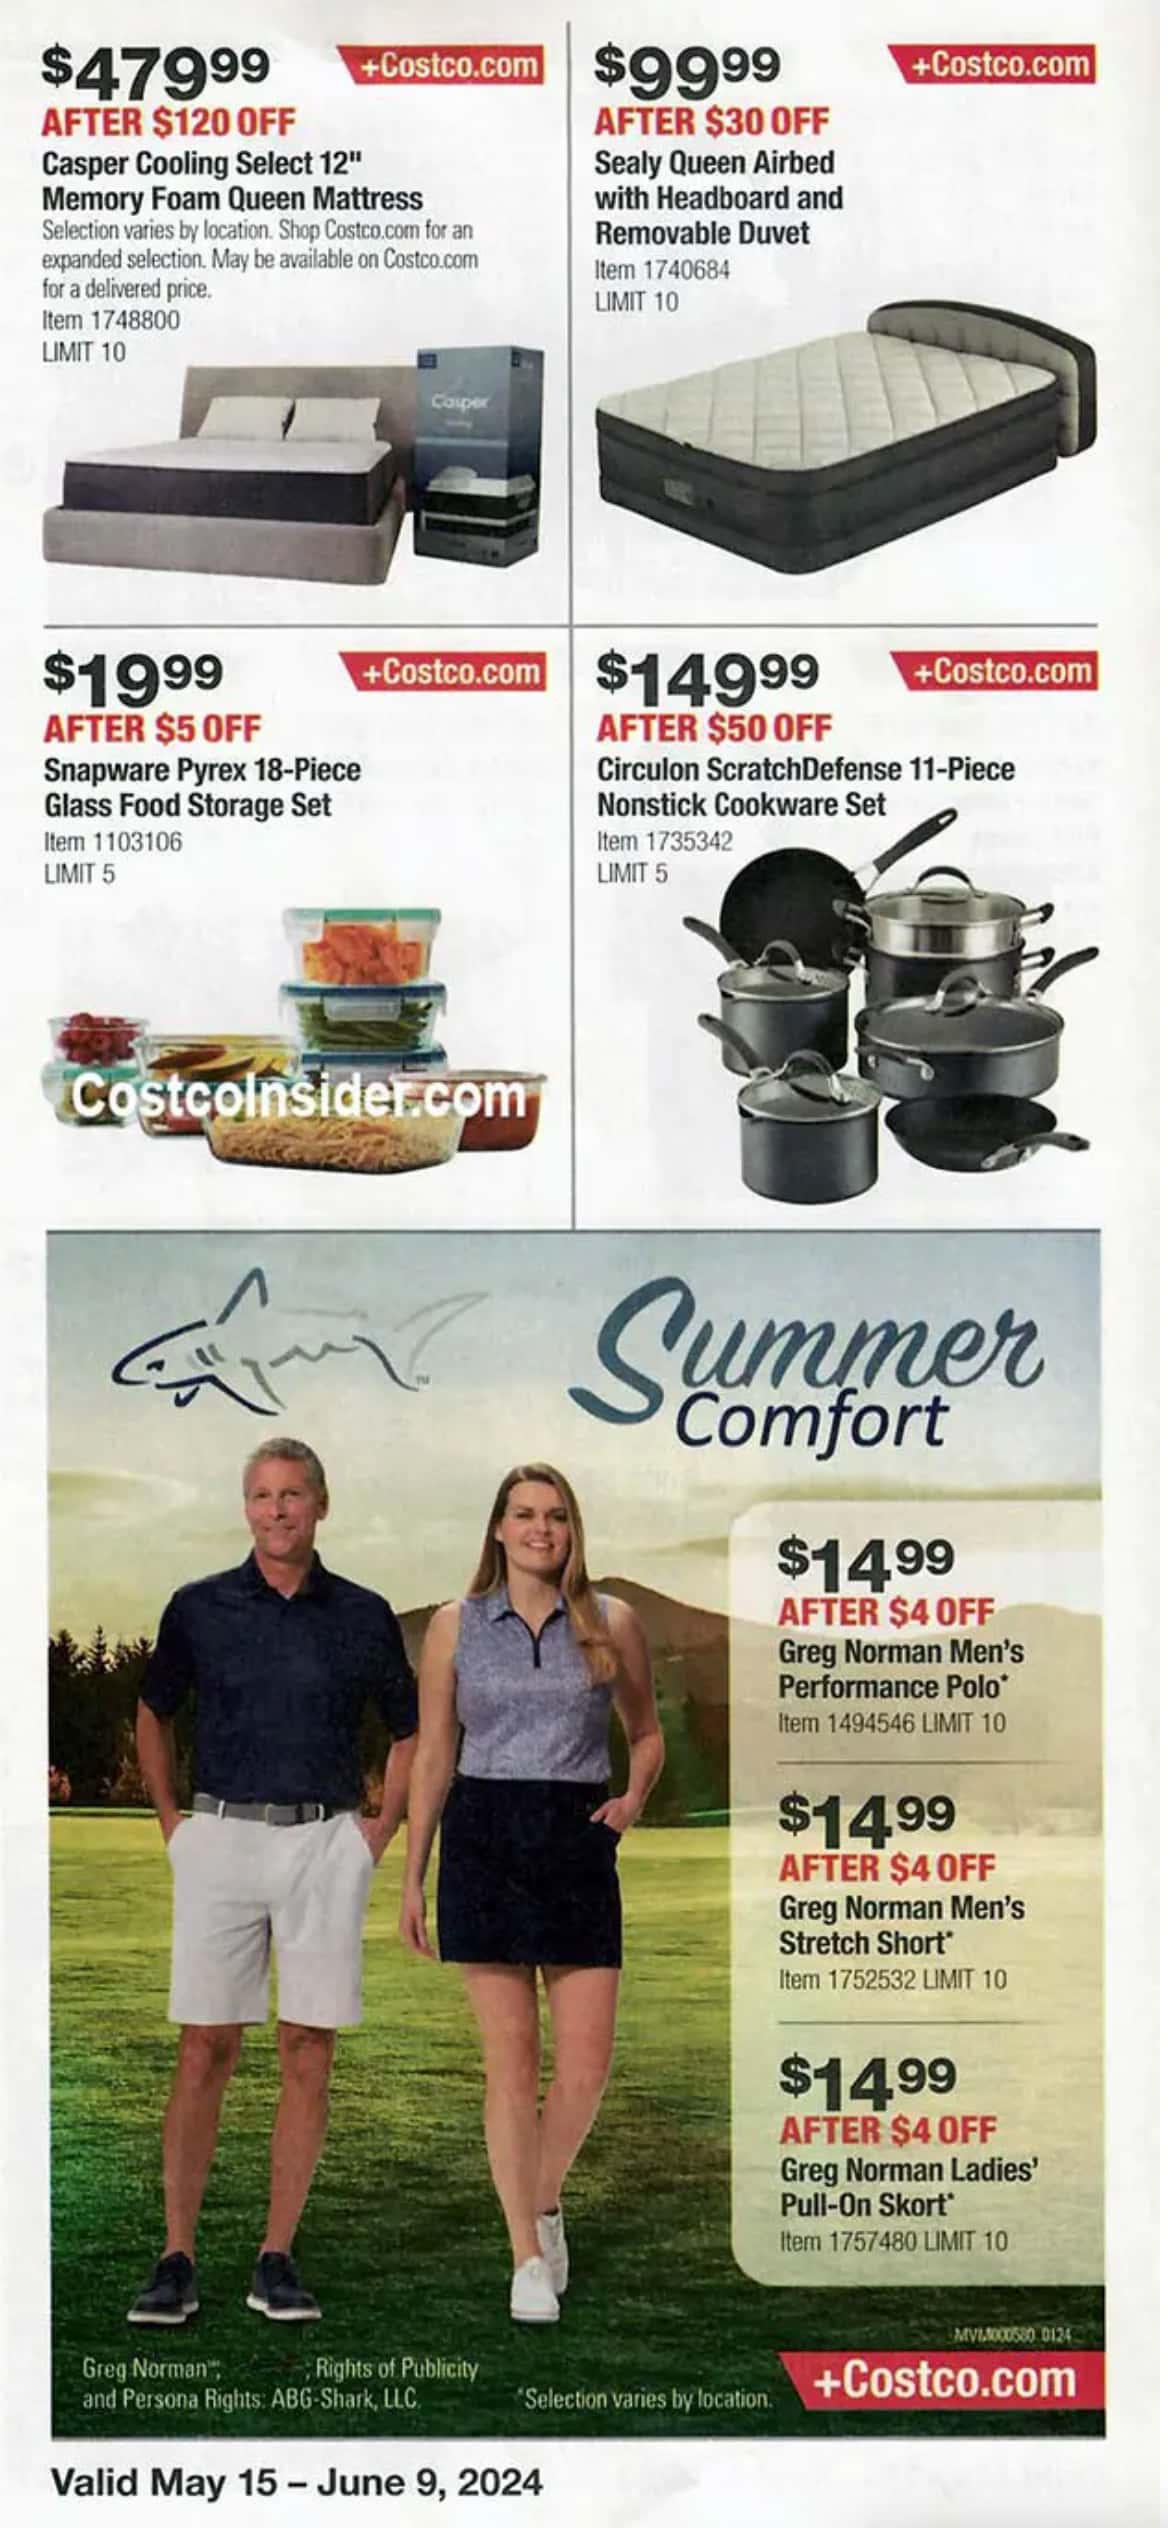 Costco July 2024 Weekly Sales, Deals, Discounts and Digital Coupons.